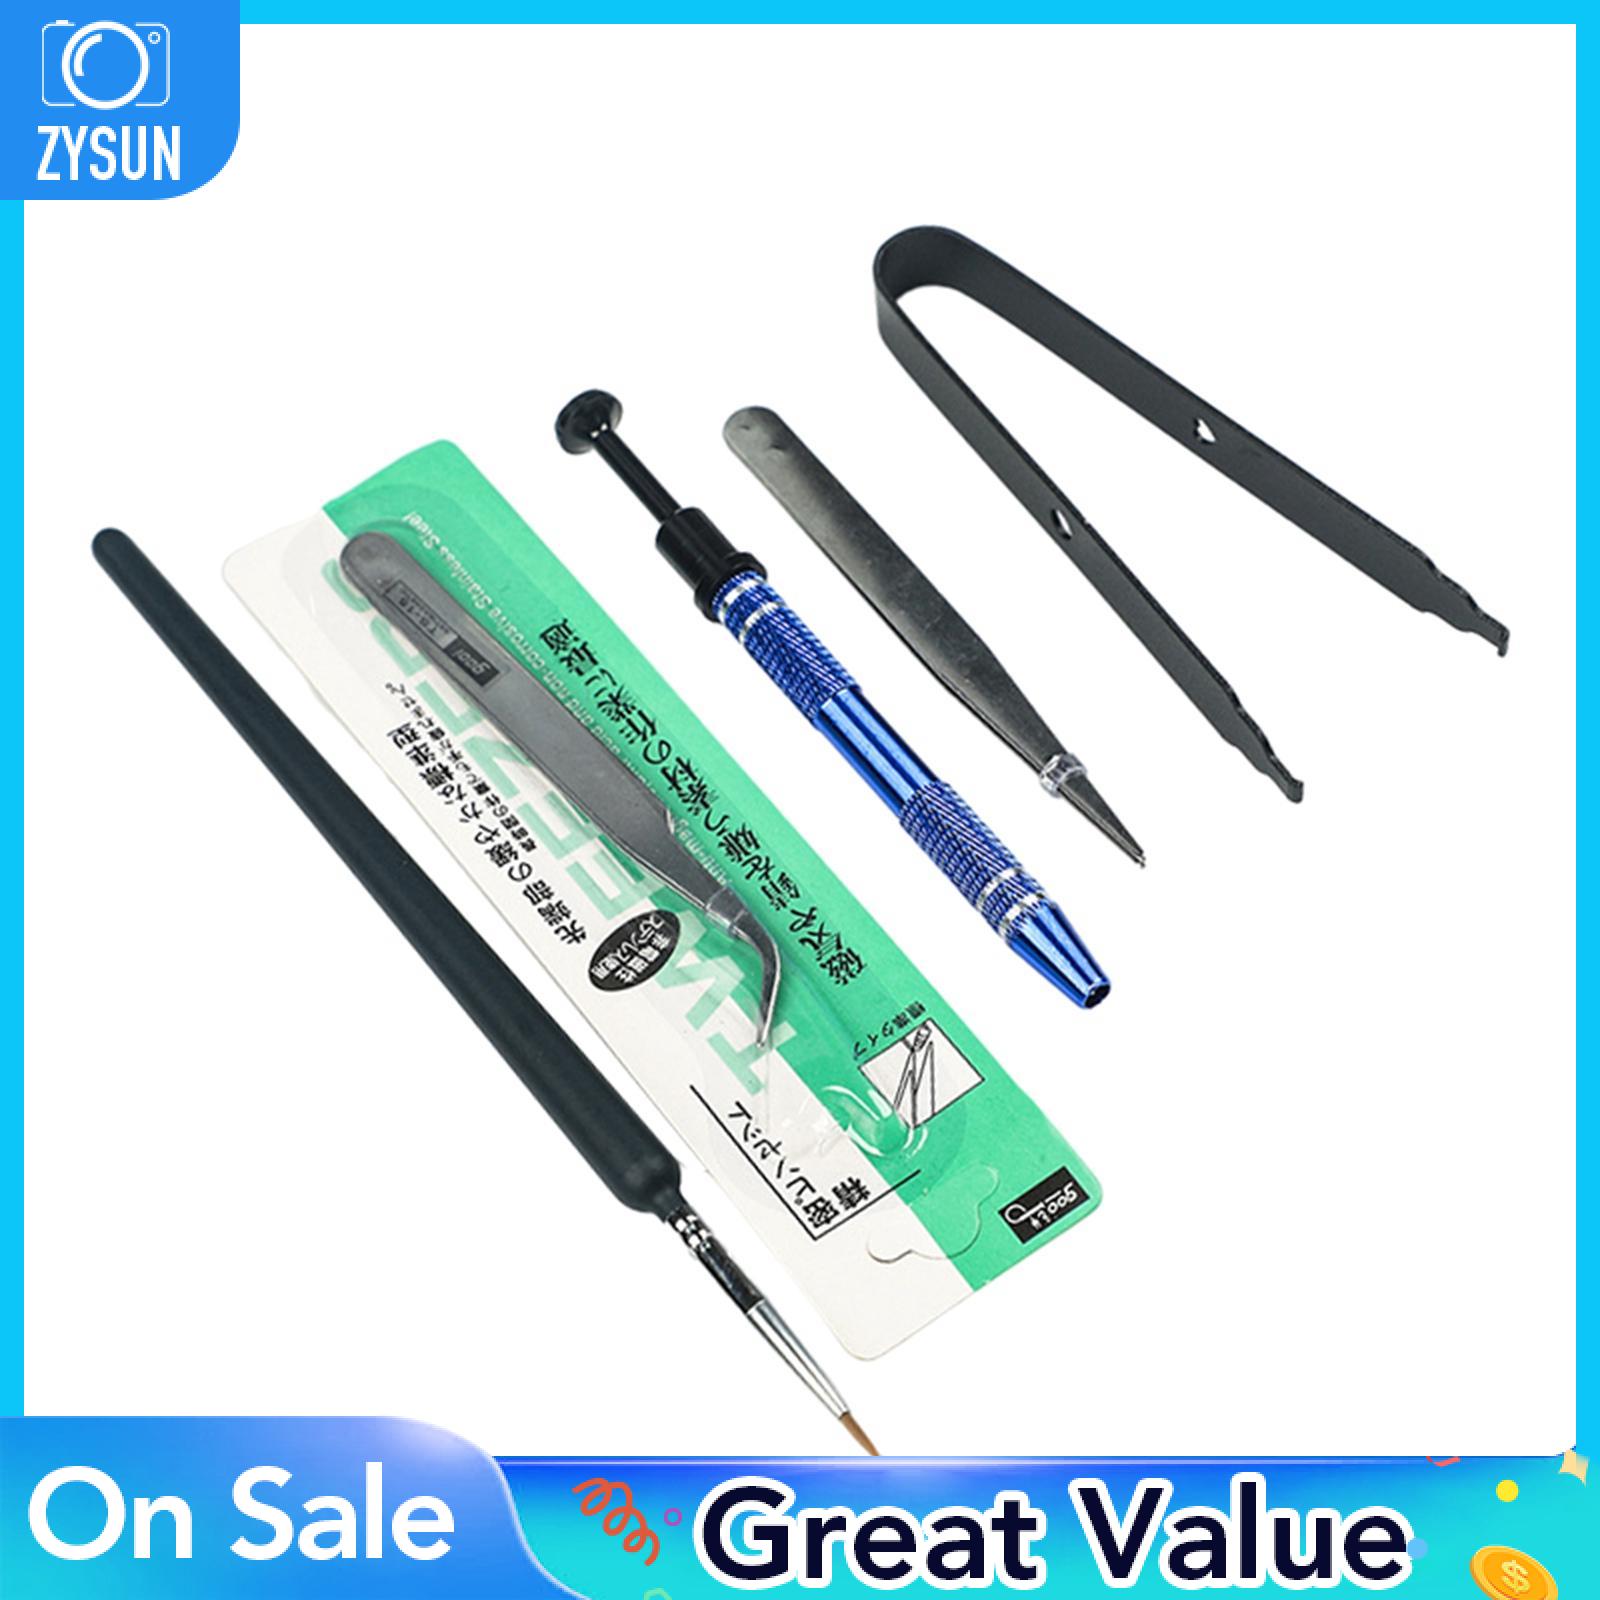 ZYSUN 5 Pieces Mechanical Keyboard Switch Lube Brushes Tool Kit Tweezers Clamp Opener for Remover